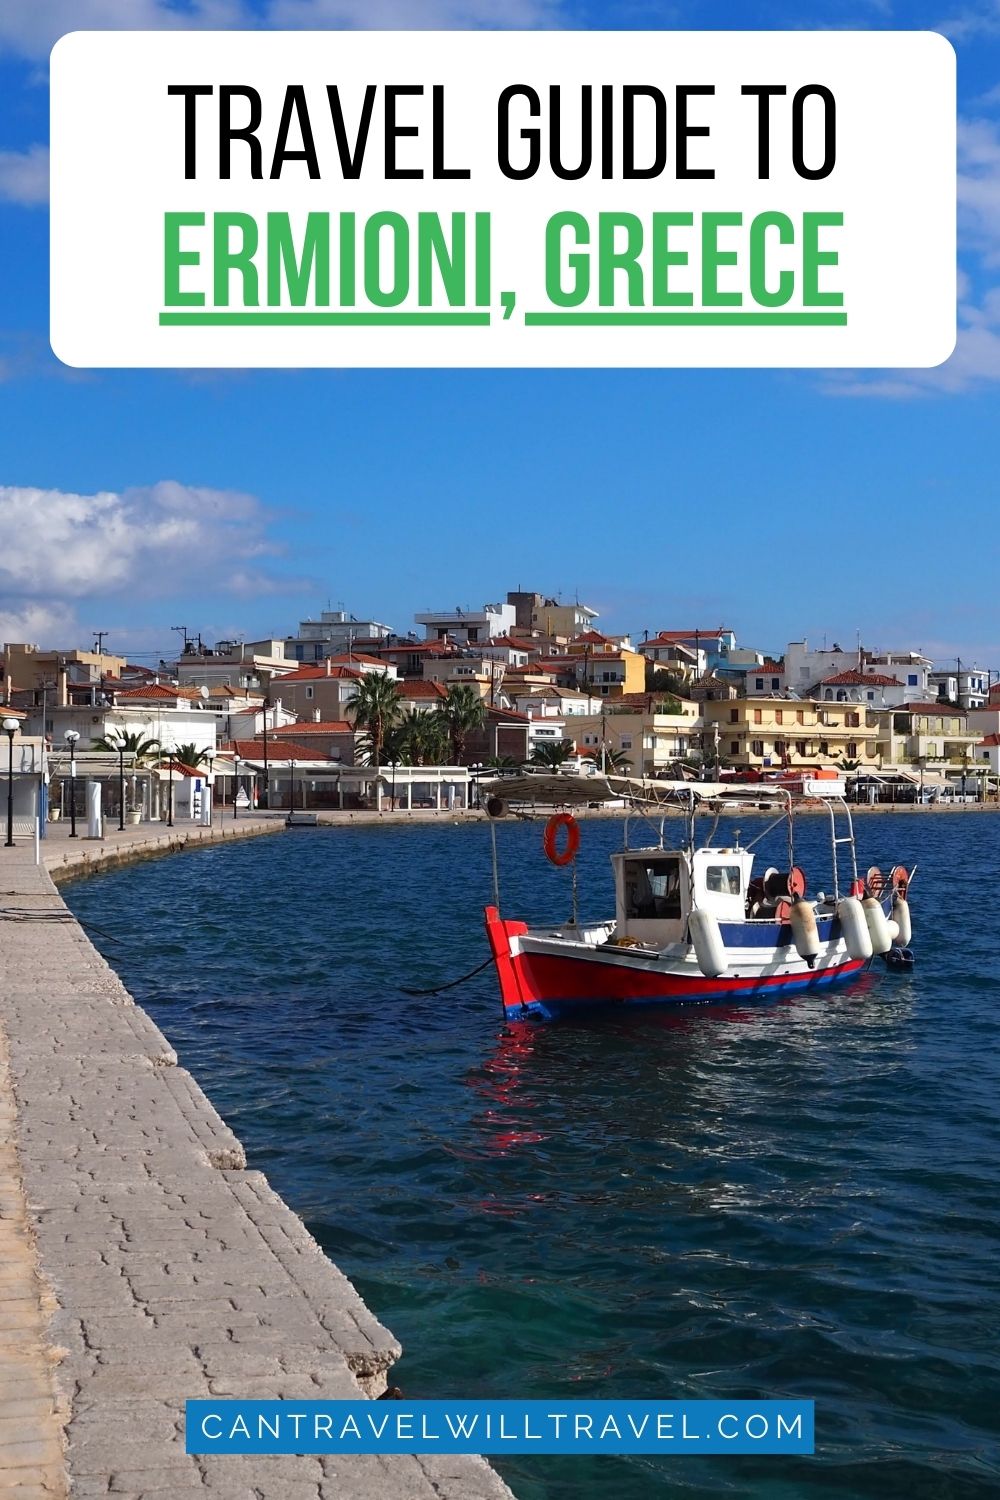 Travel Guide to Ermioni in the Peloponnese, Greece